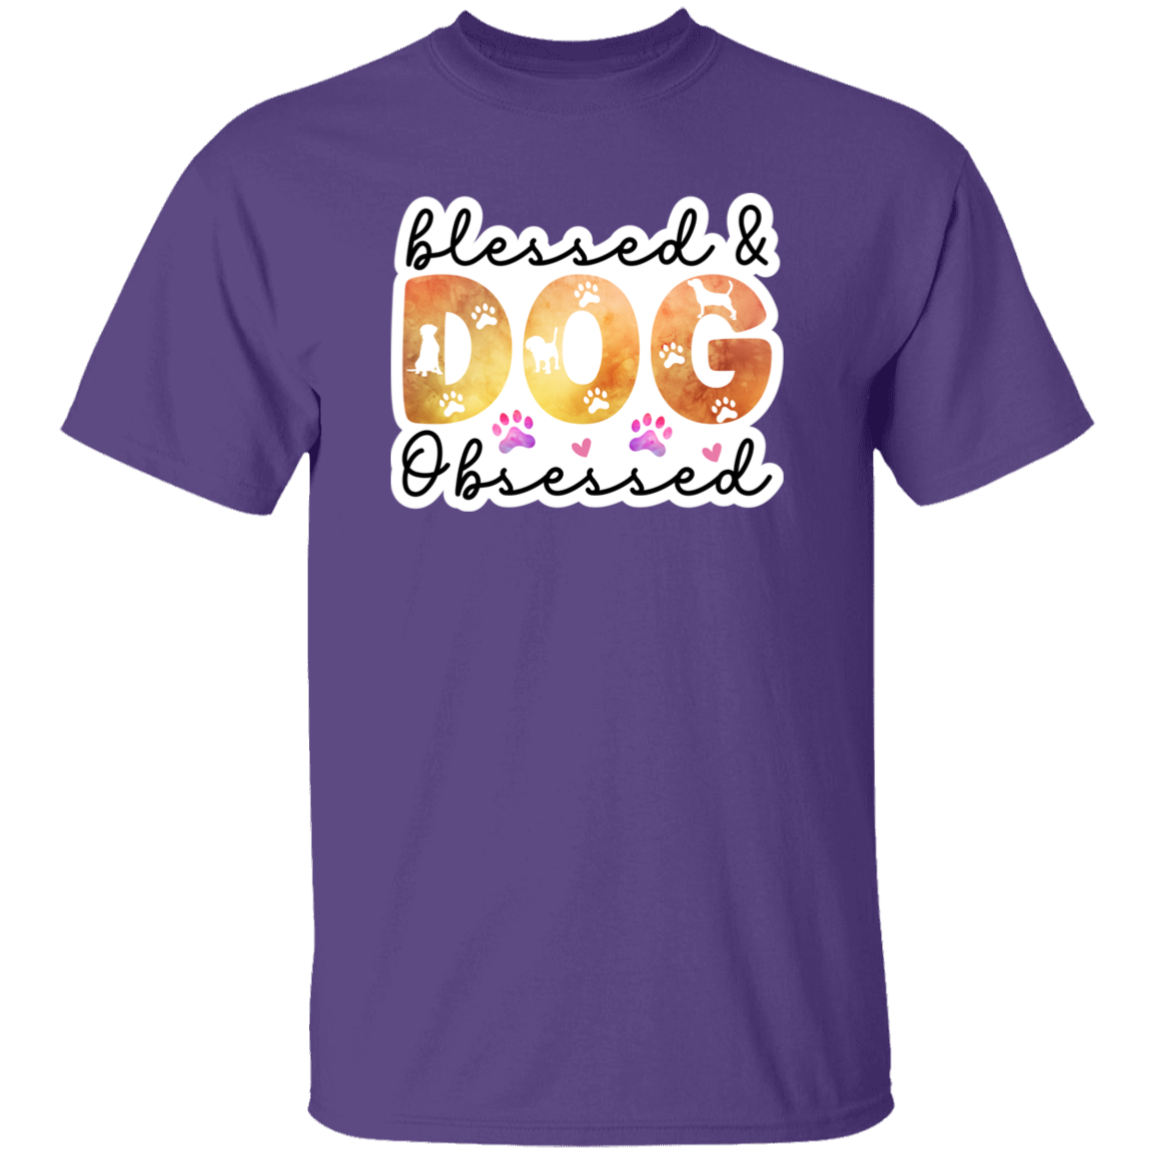 Blessed & Dog Obsessed Watercolor T-Shirt